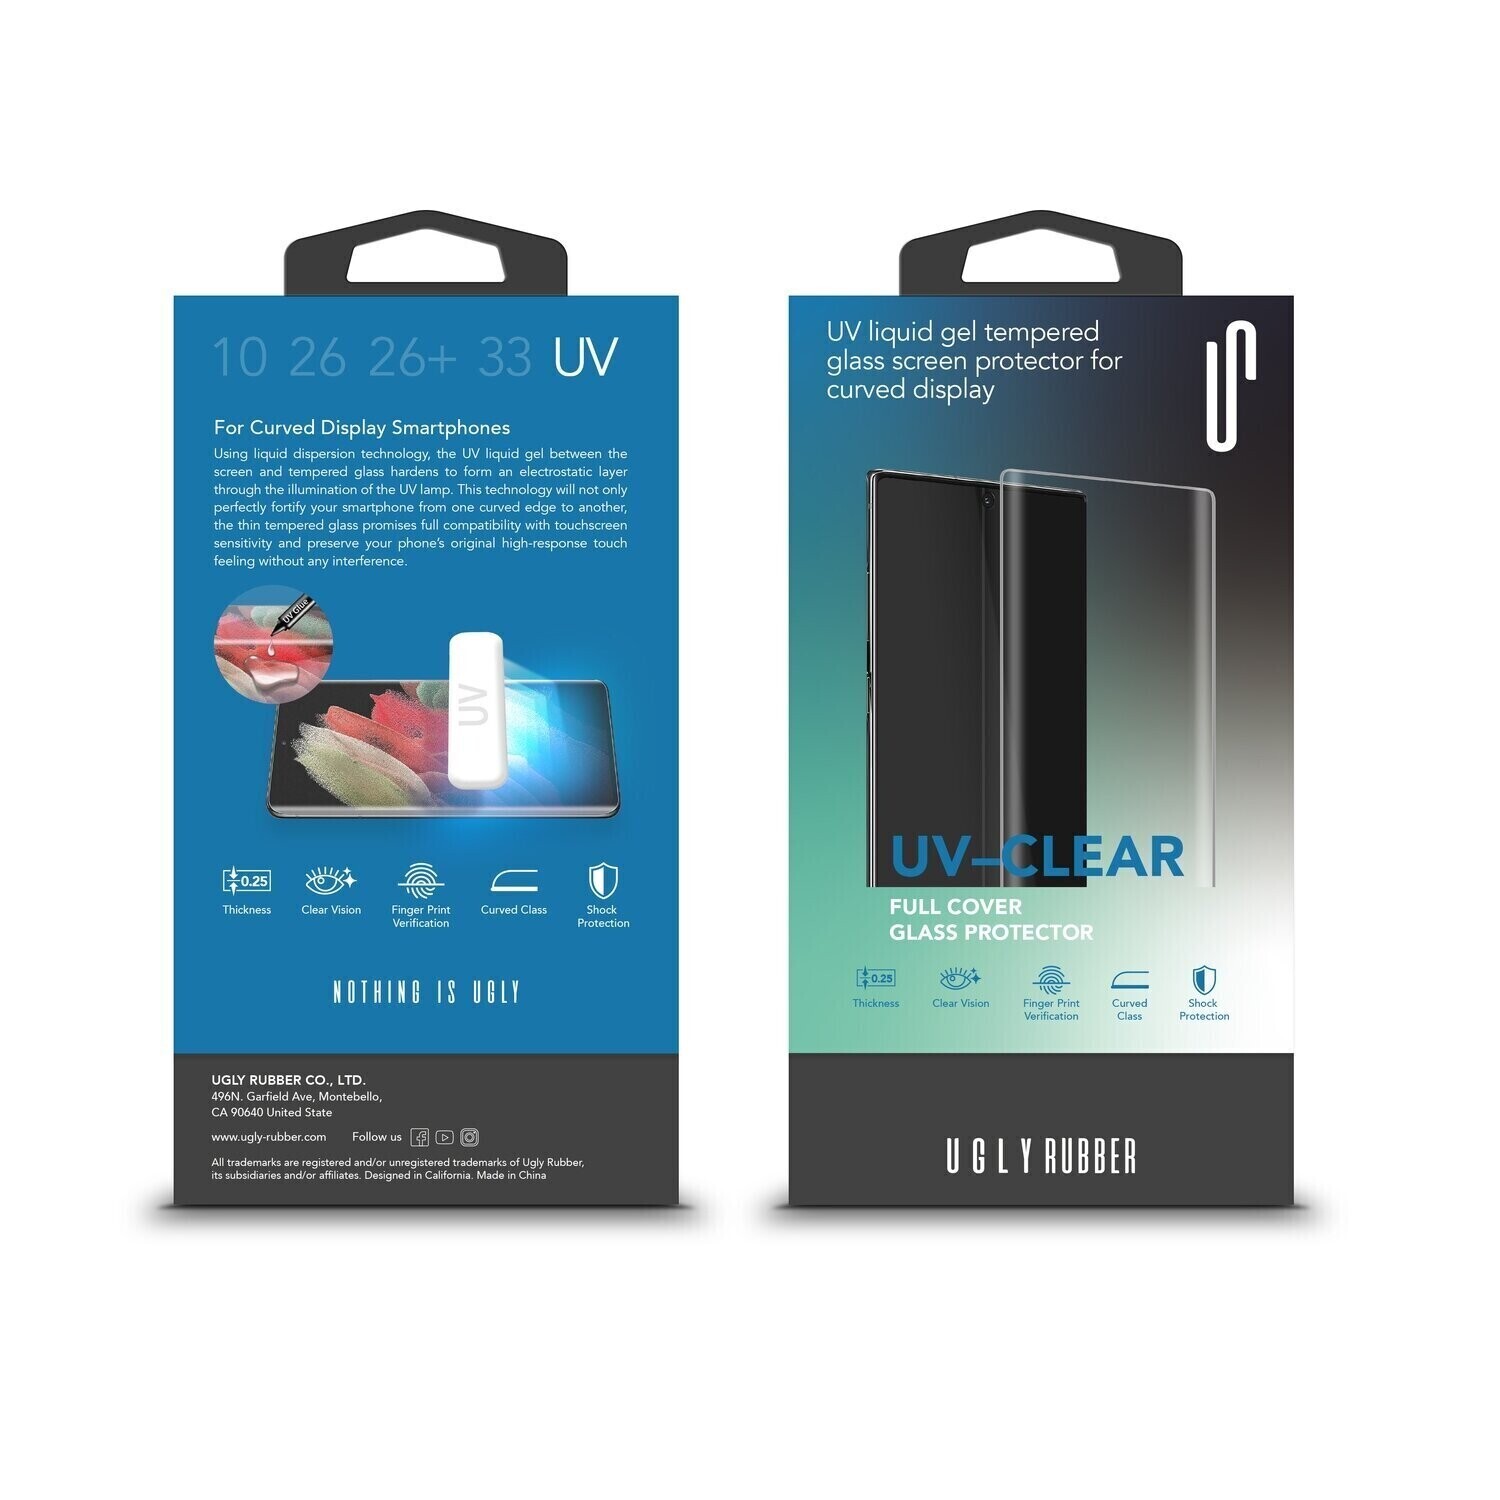 Ugly Rubber Xiaomi 10 UV Liquid Gel Tempered Glass, Clear (Screen Protector)